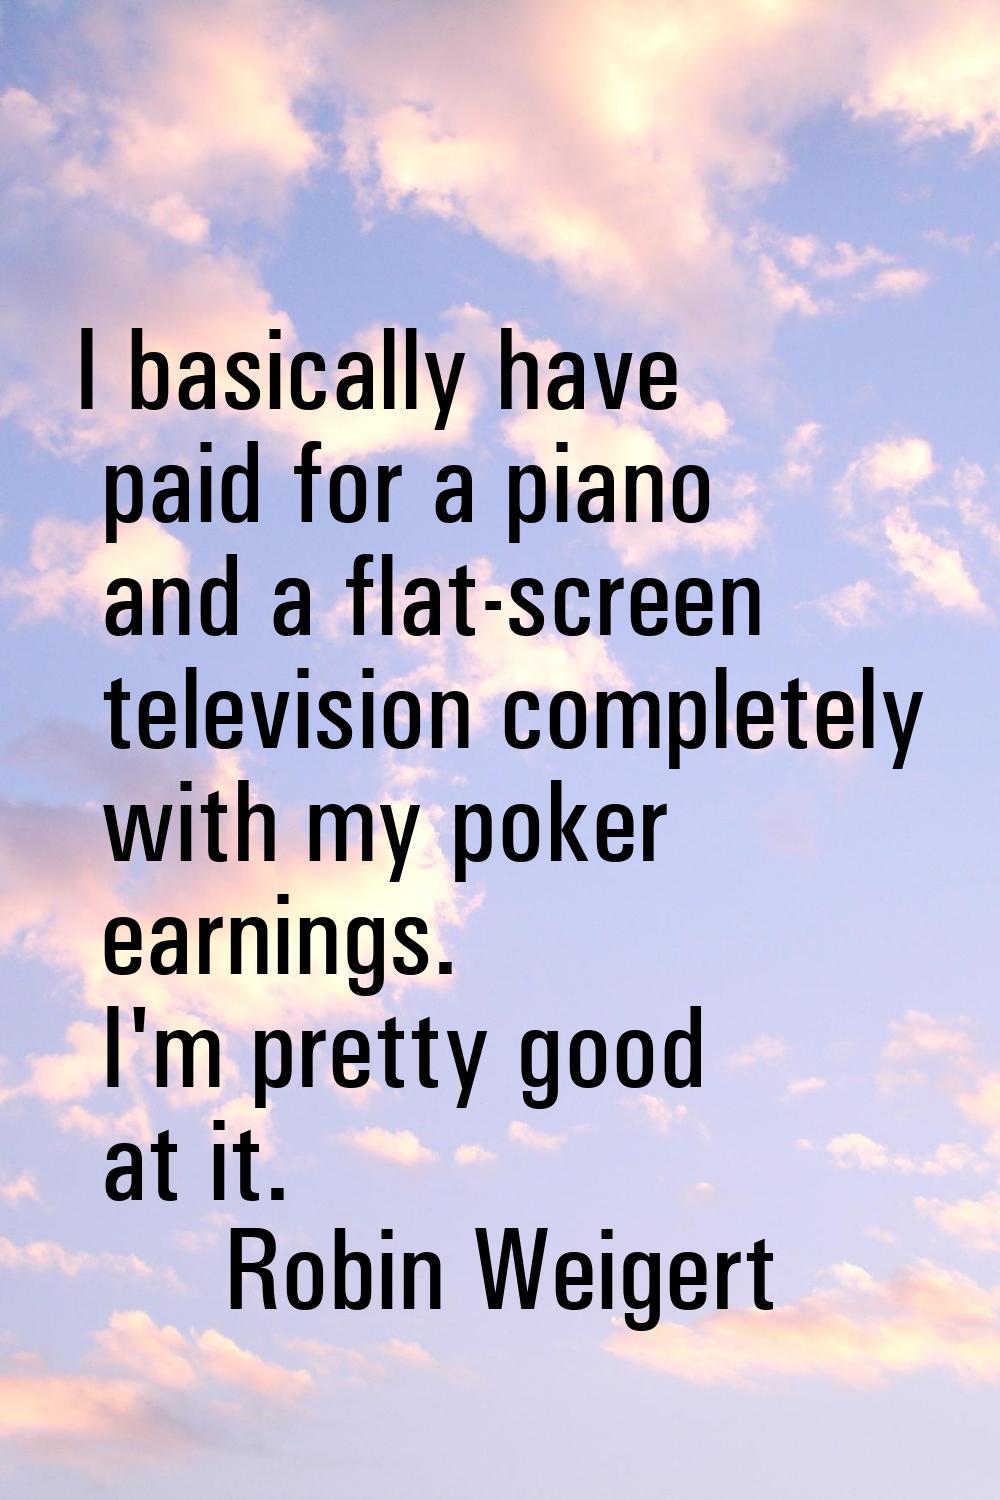 I basically have paid for a piano and a flat-screen television completely with my poker earnings. I